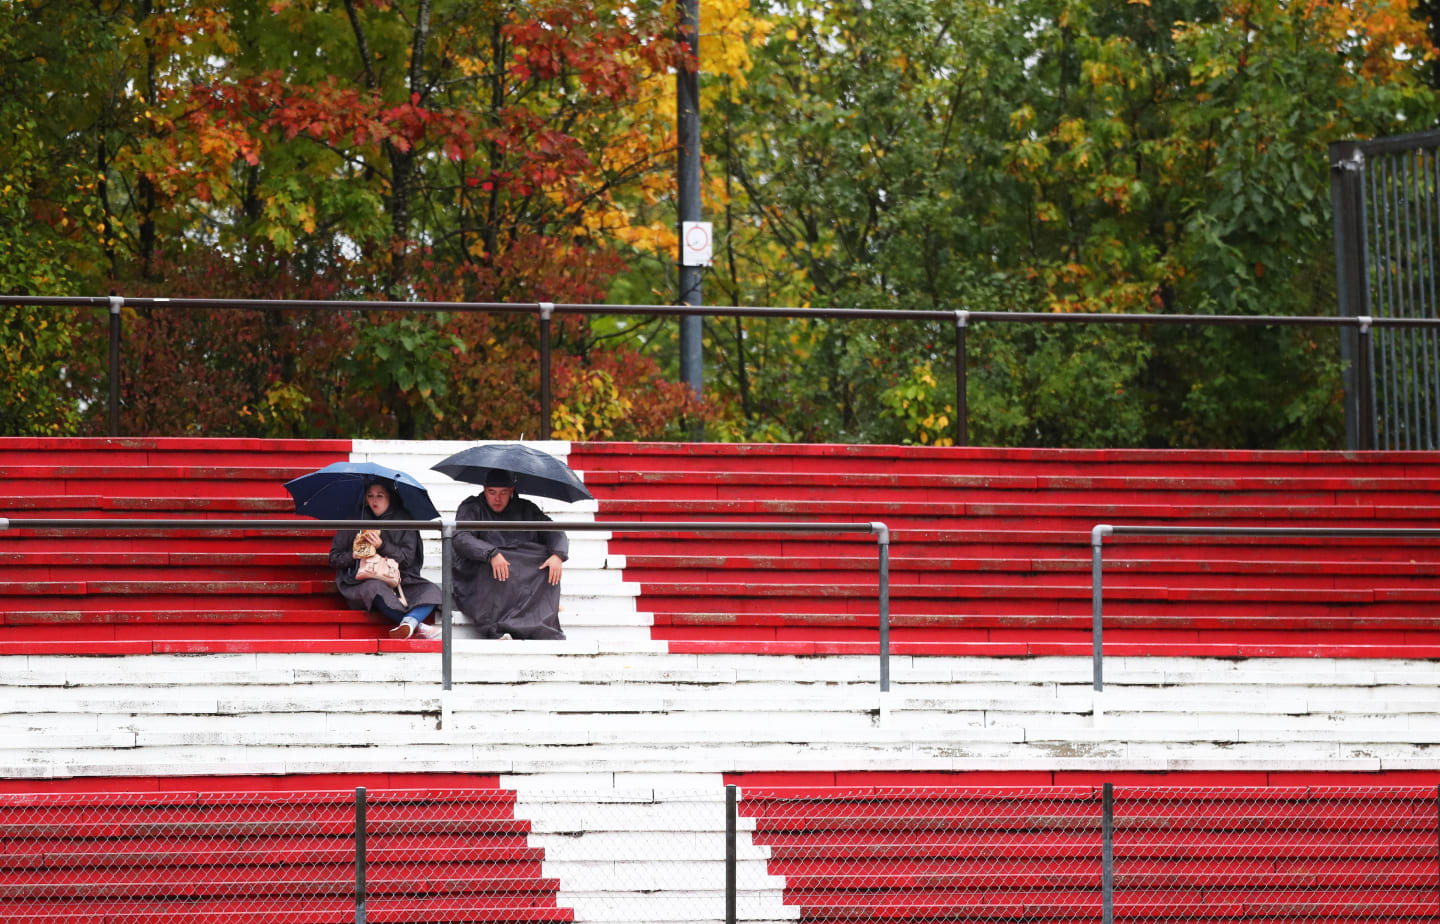 NUERBURG, GERMANY - OCTOBER 09: Fans wait for the action to start in the grandstands during